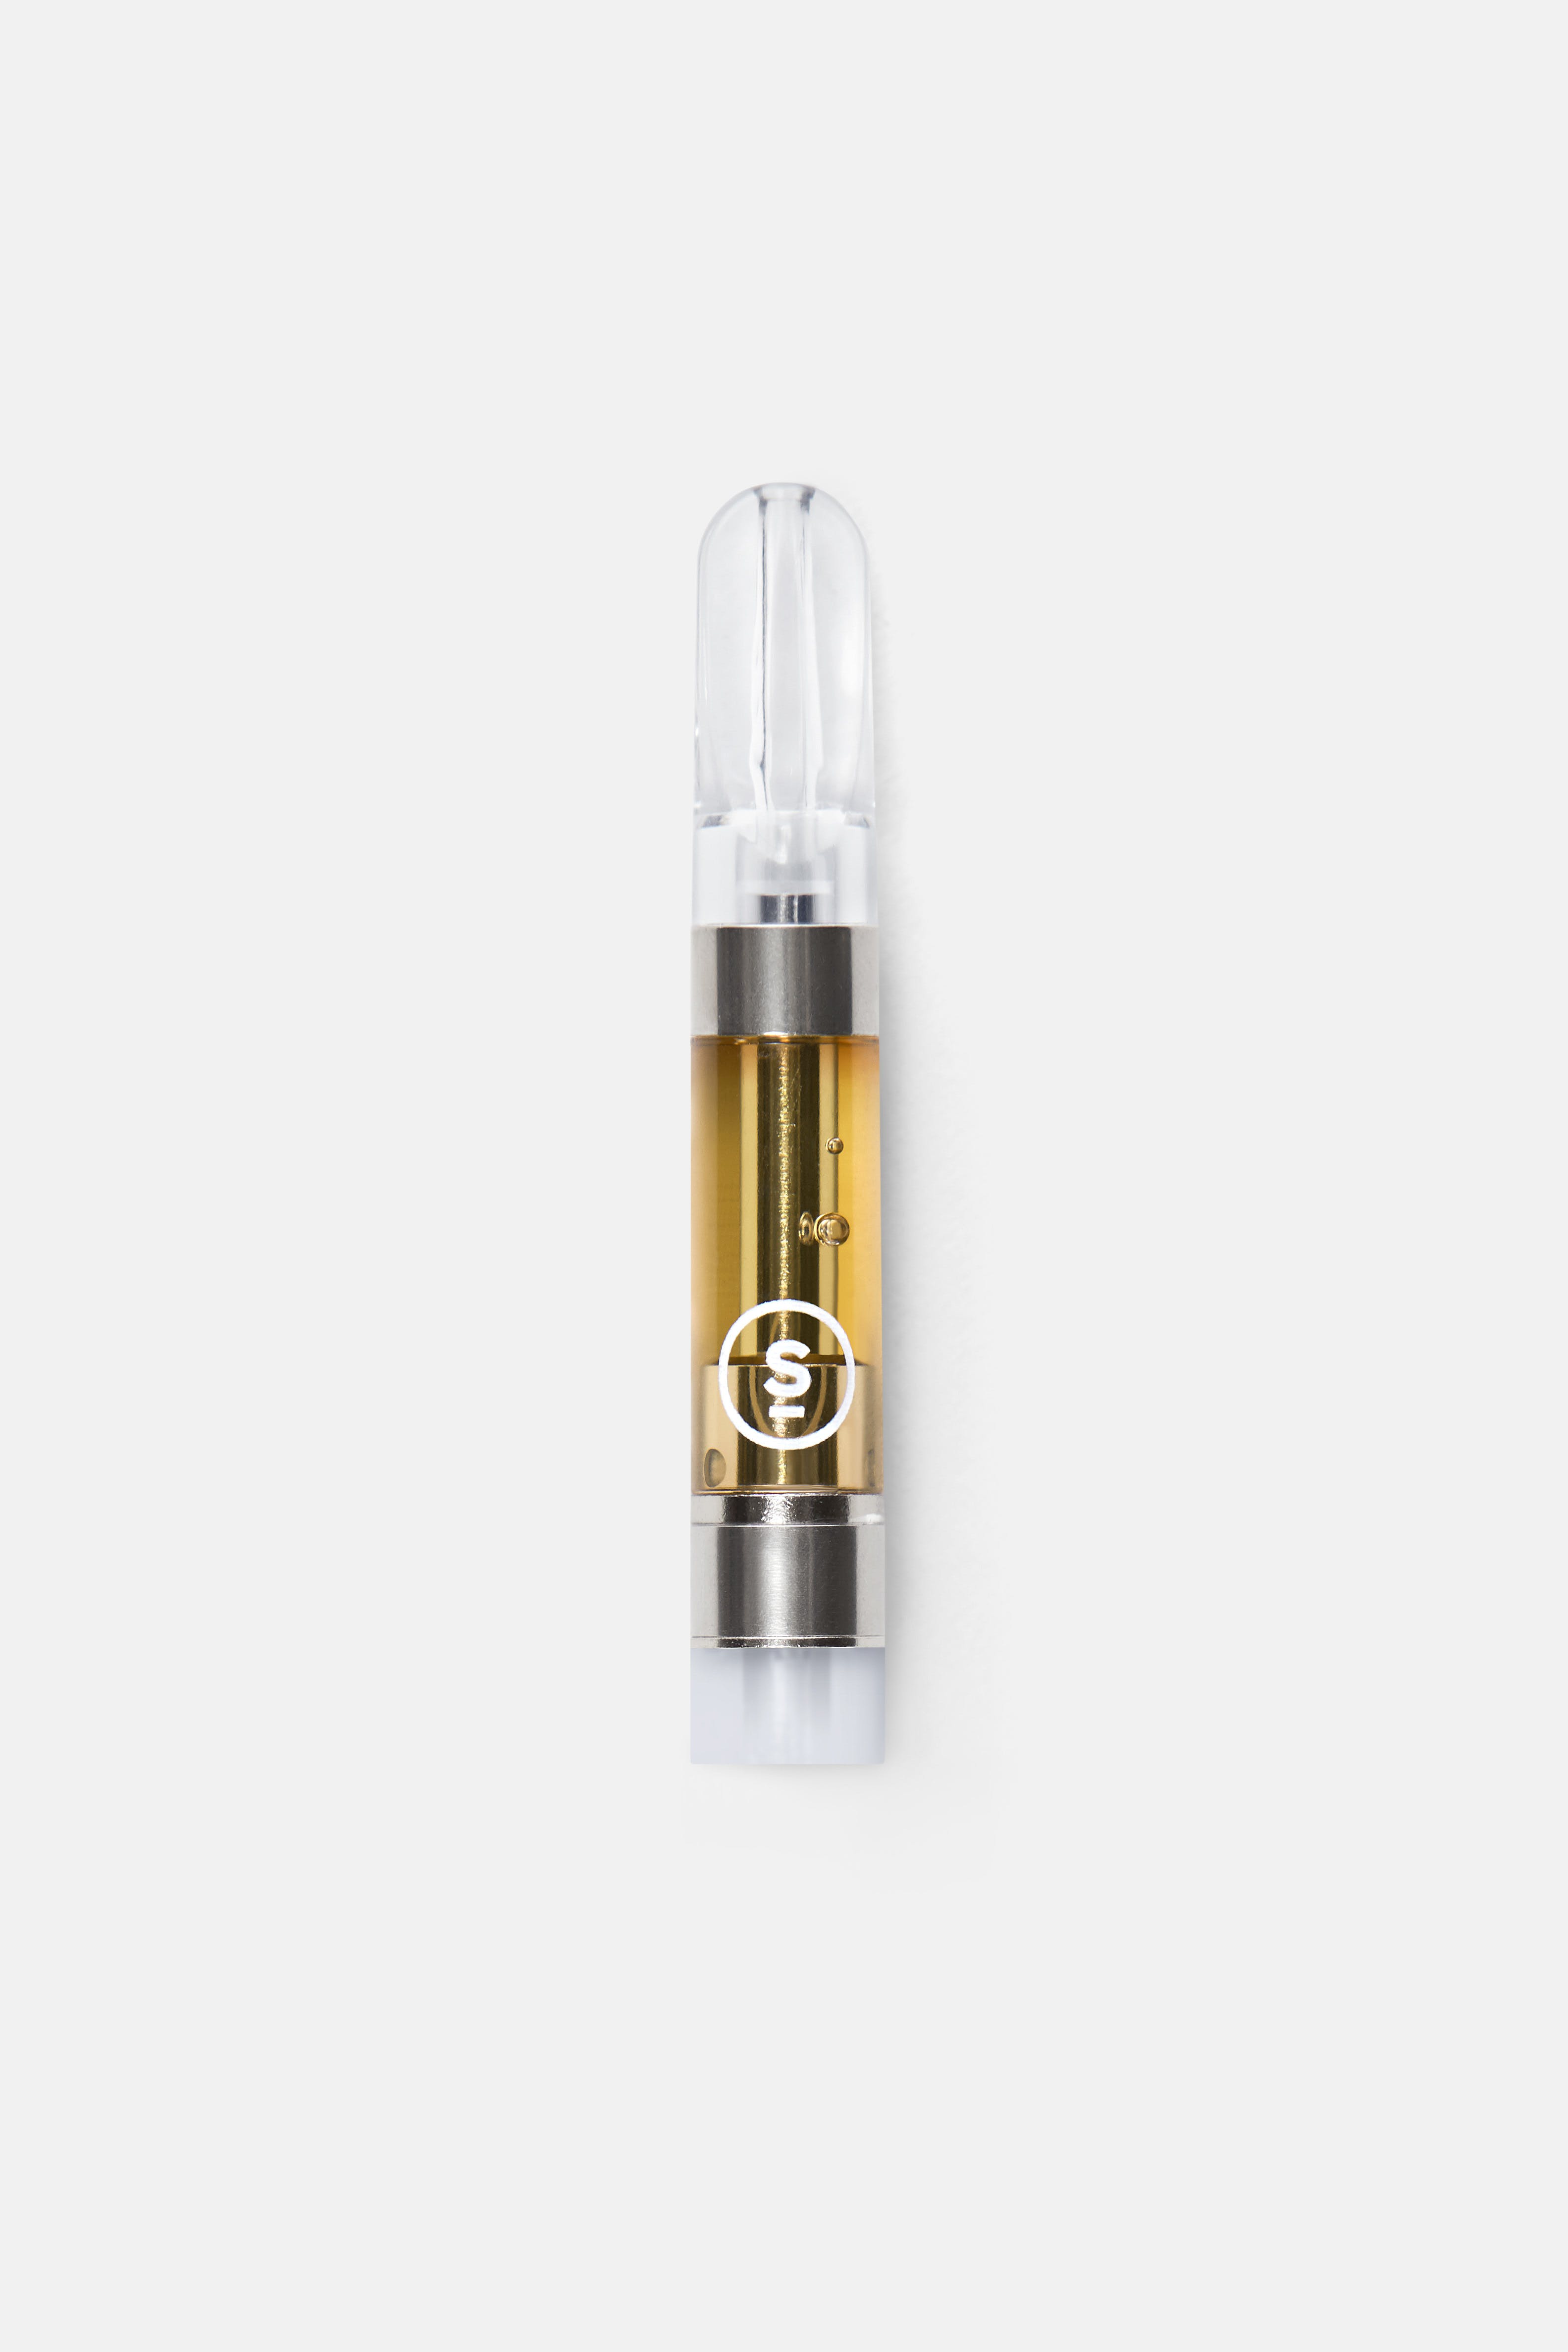 concentrate-double-dream-select-vapes-500mg